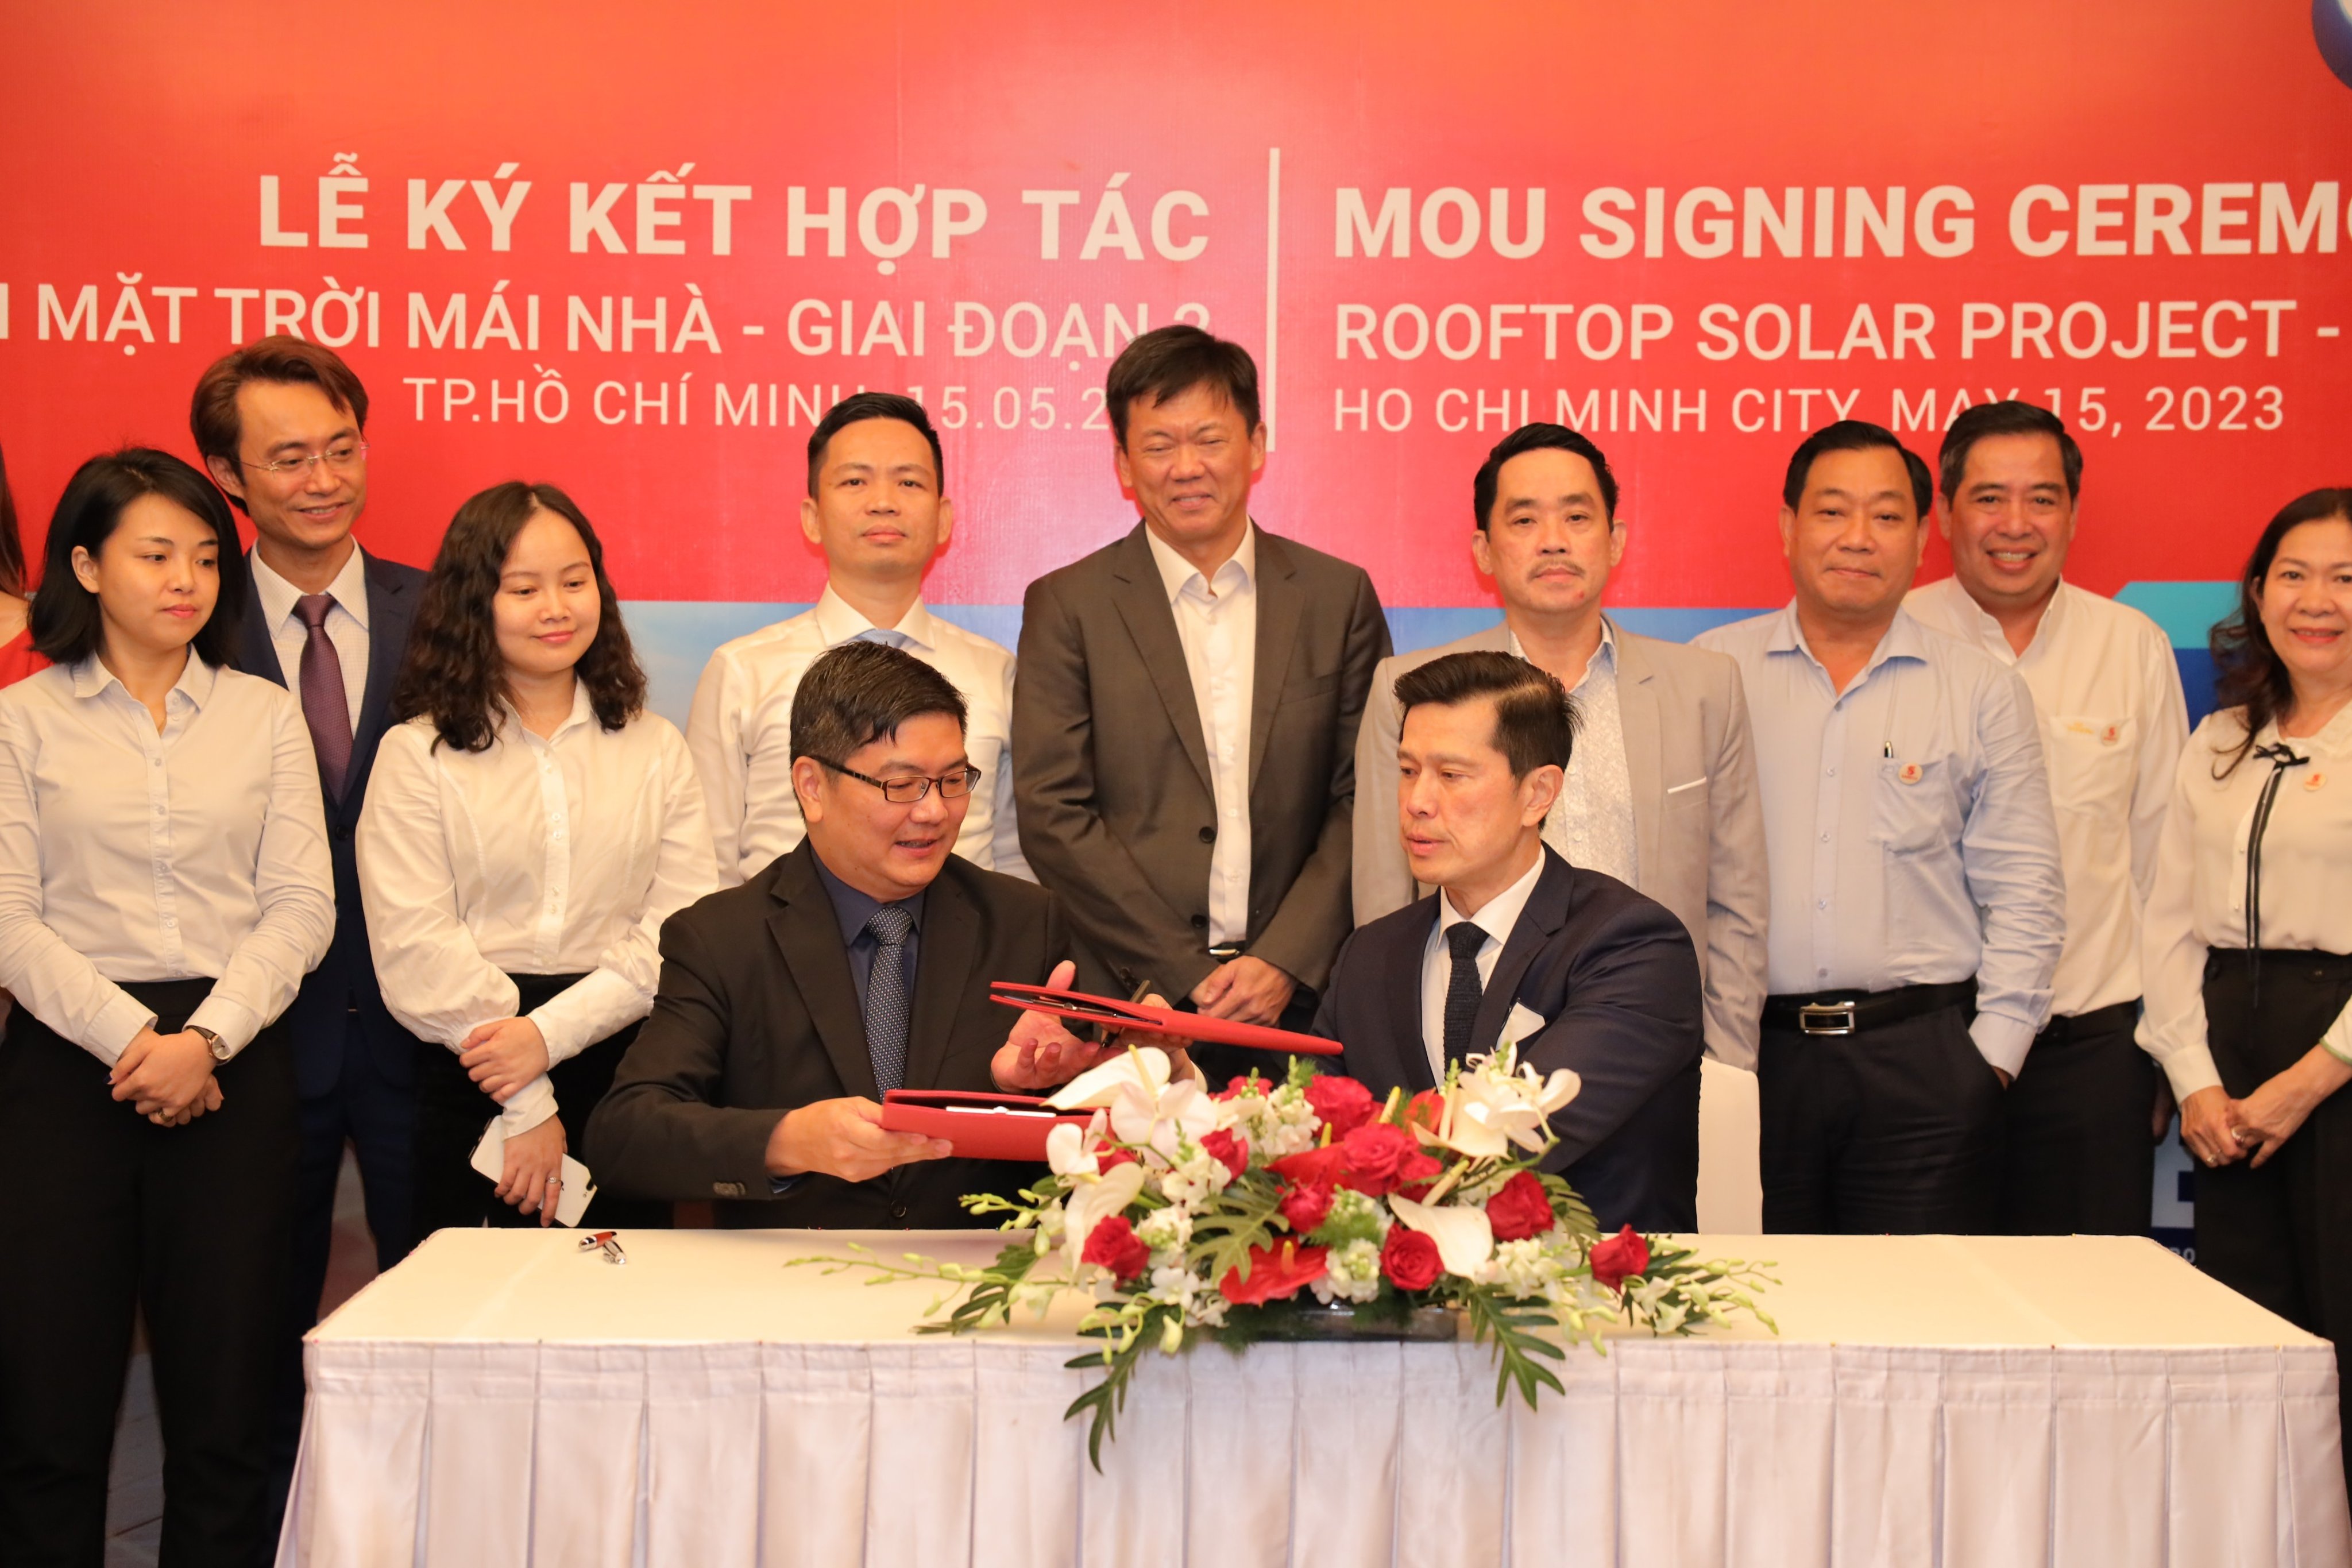 SABECO ANNOUNCES PARTNERSHIP WITH SP GROUP TO INSTALL ROOFTOP SOLAR POWER SYSTEMS AT 9 BREWERIES TO ACHIEVE GREEN GROWTH